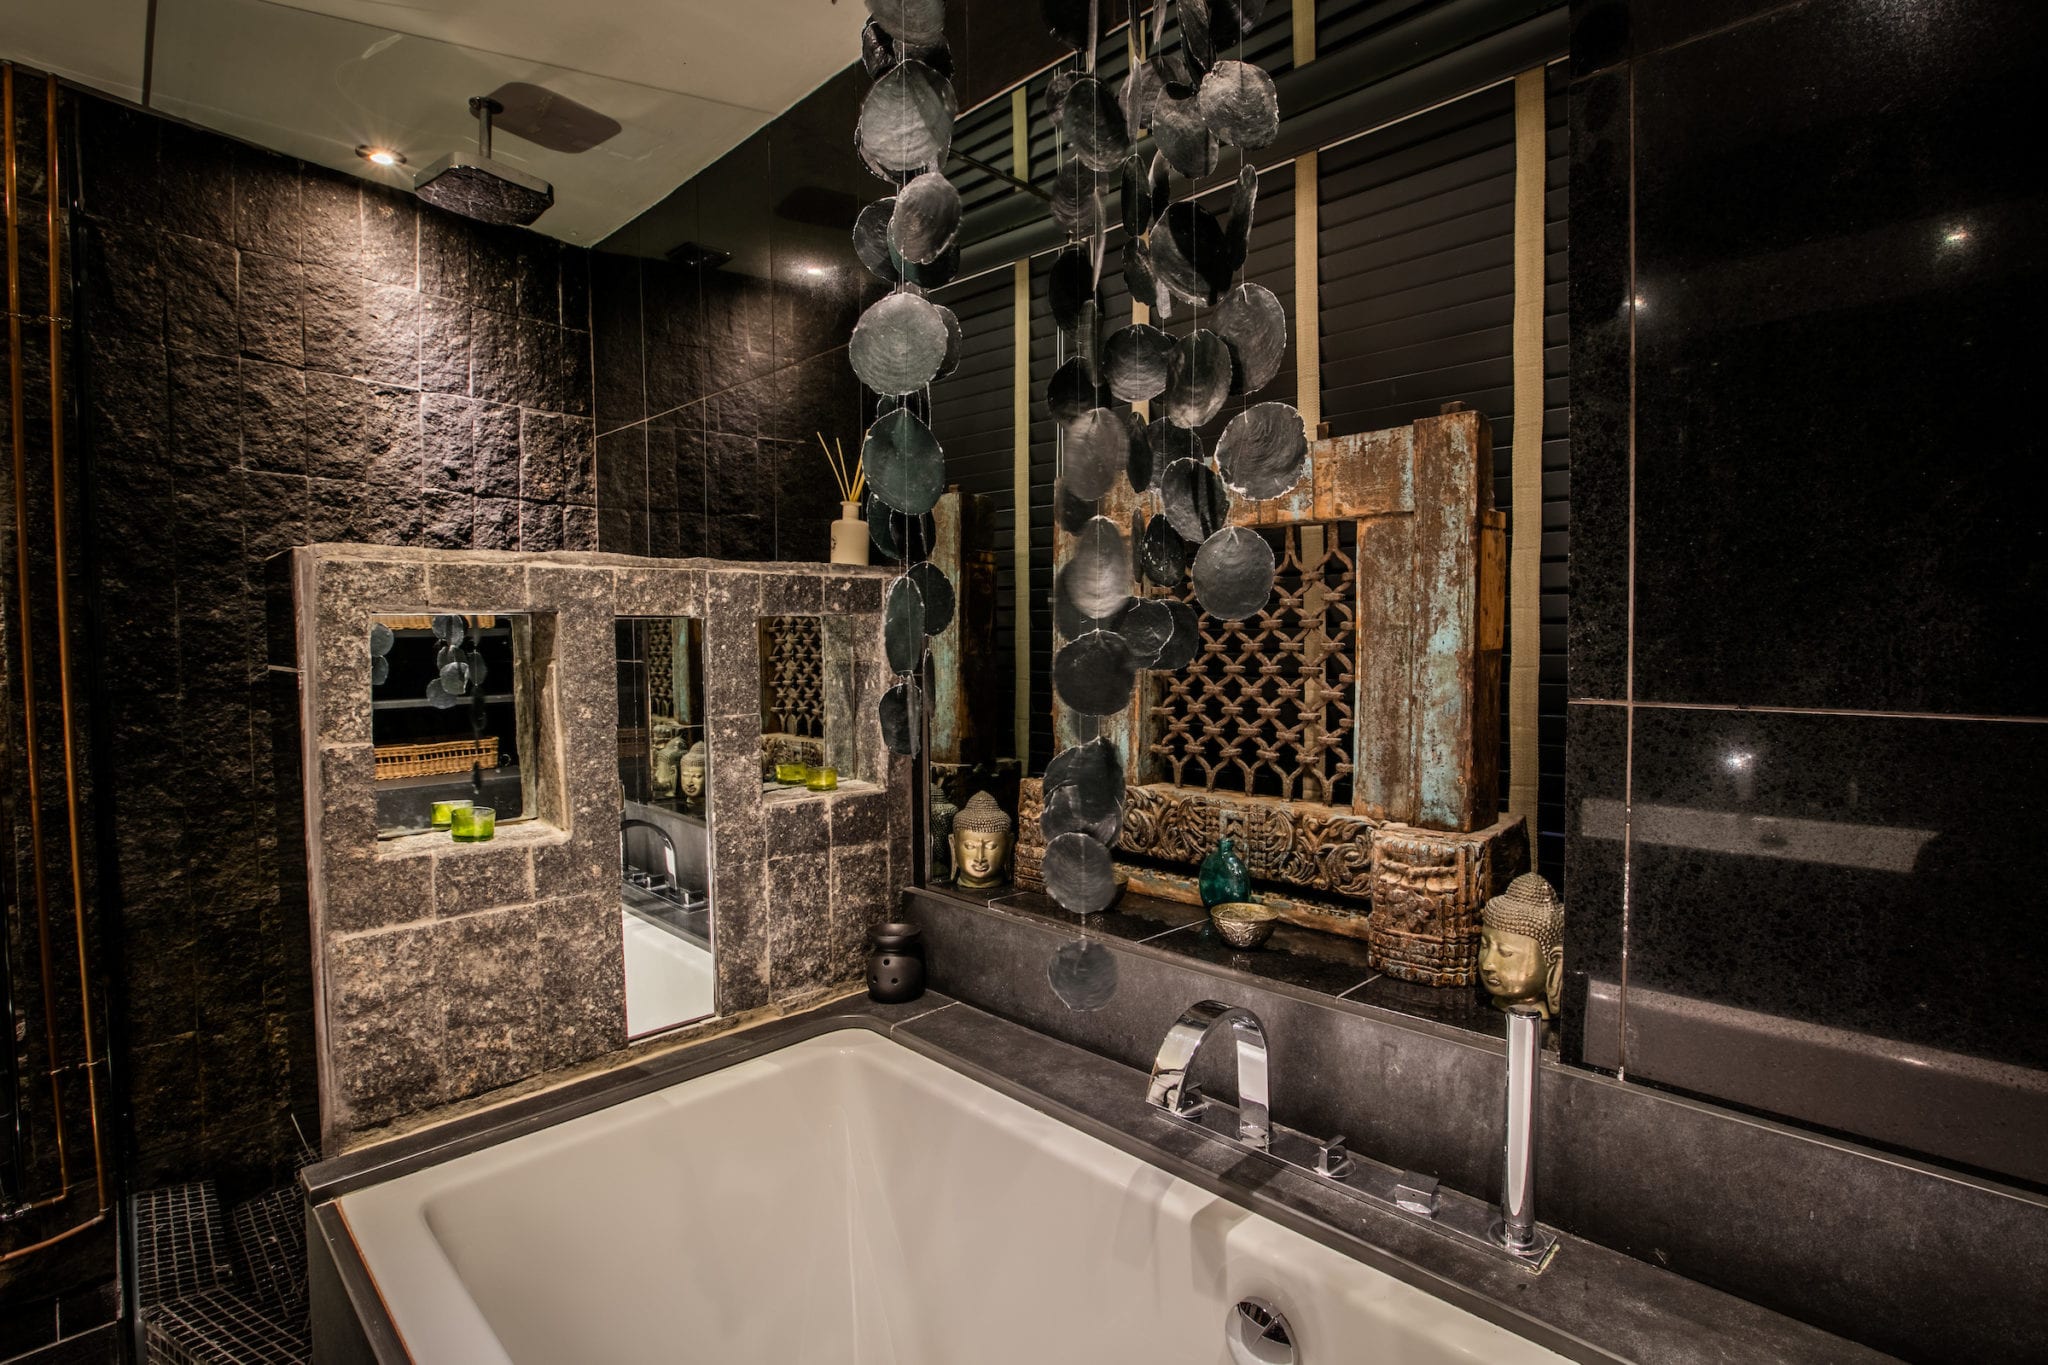 A bathroom with black slate, exposed stone and luxurious ethnic art